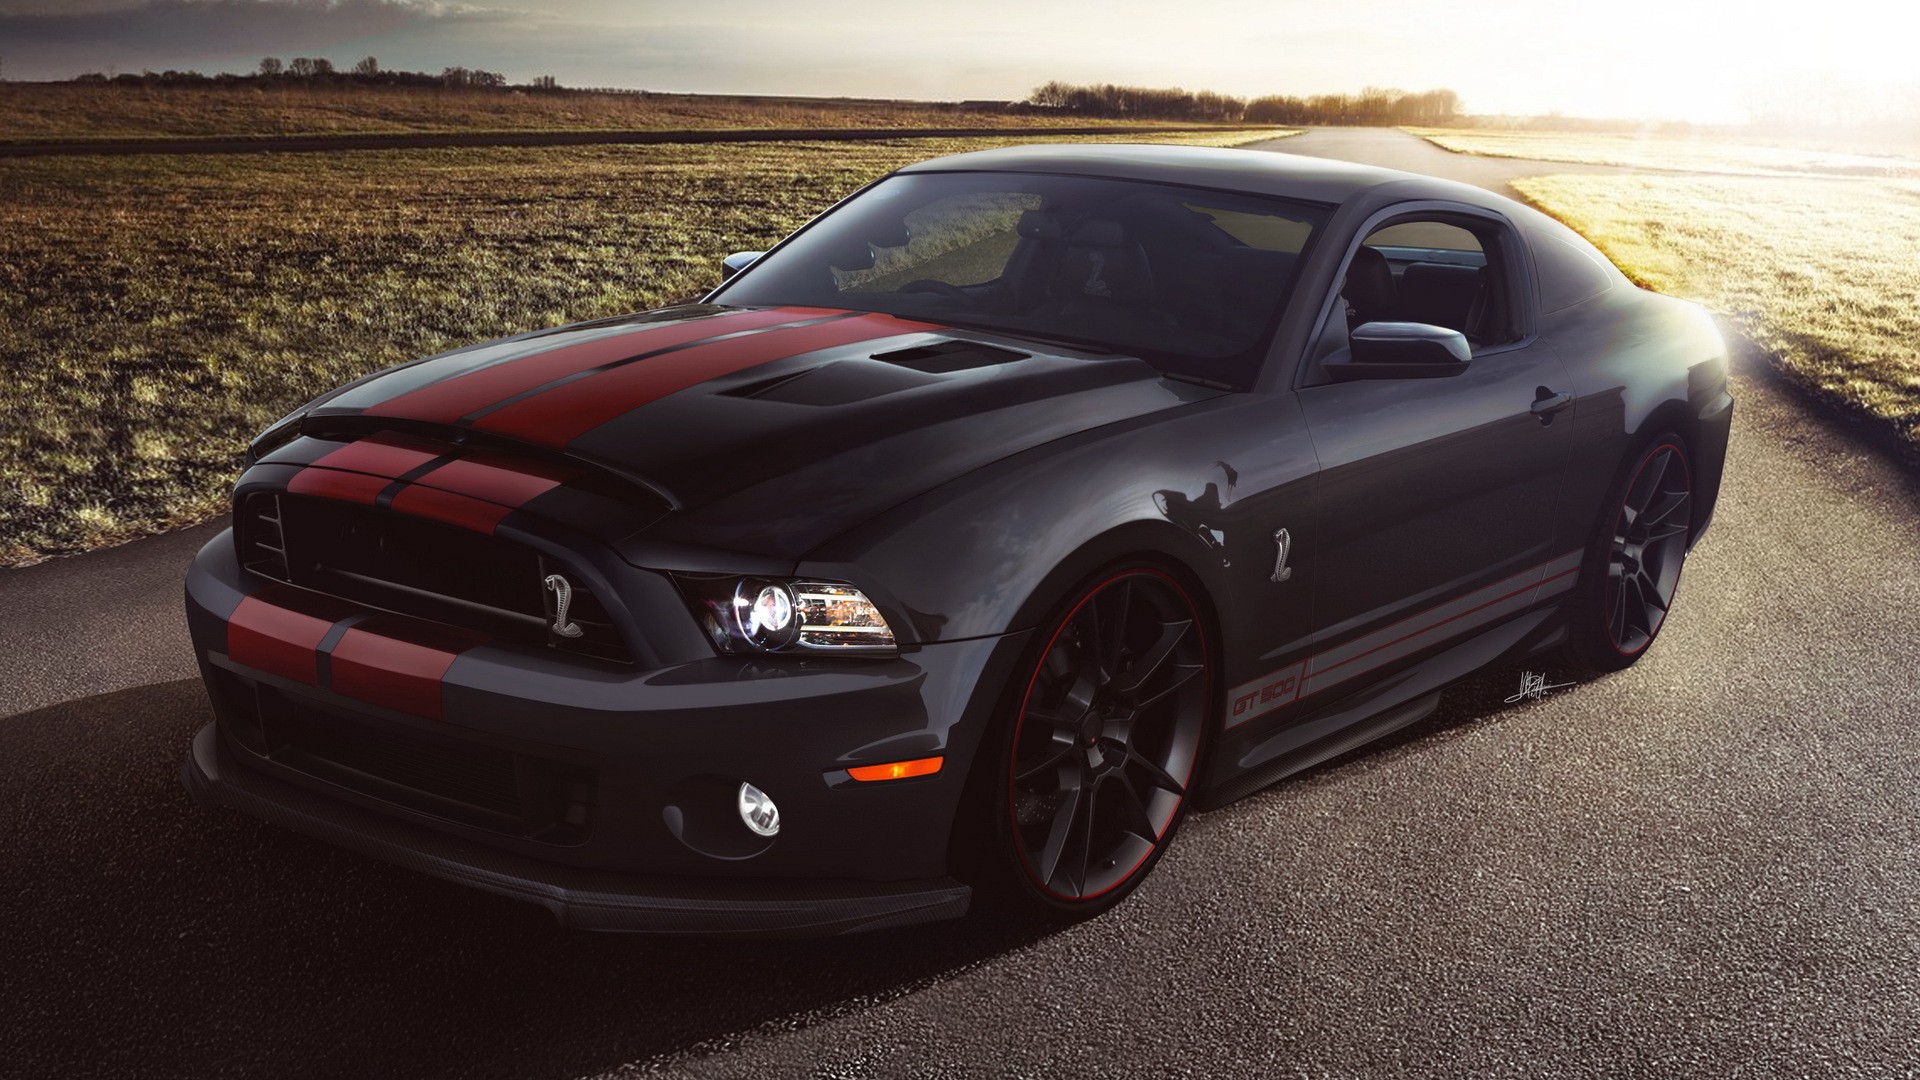 Roads Black Cars Ford Mustang Shelby Gt500 Fresh New HD Wallpaper